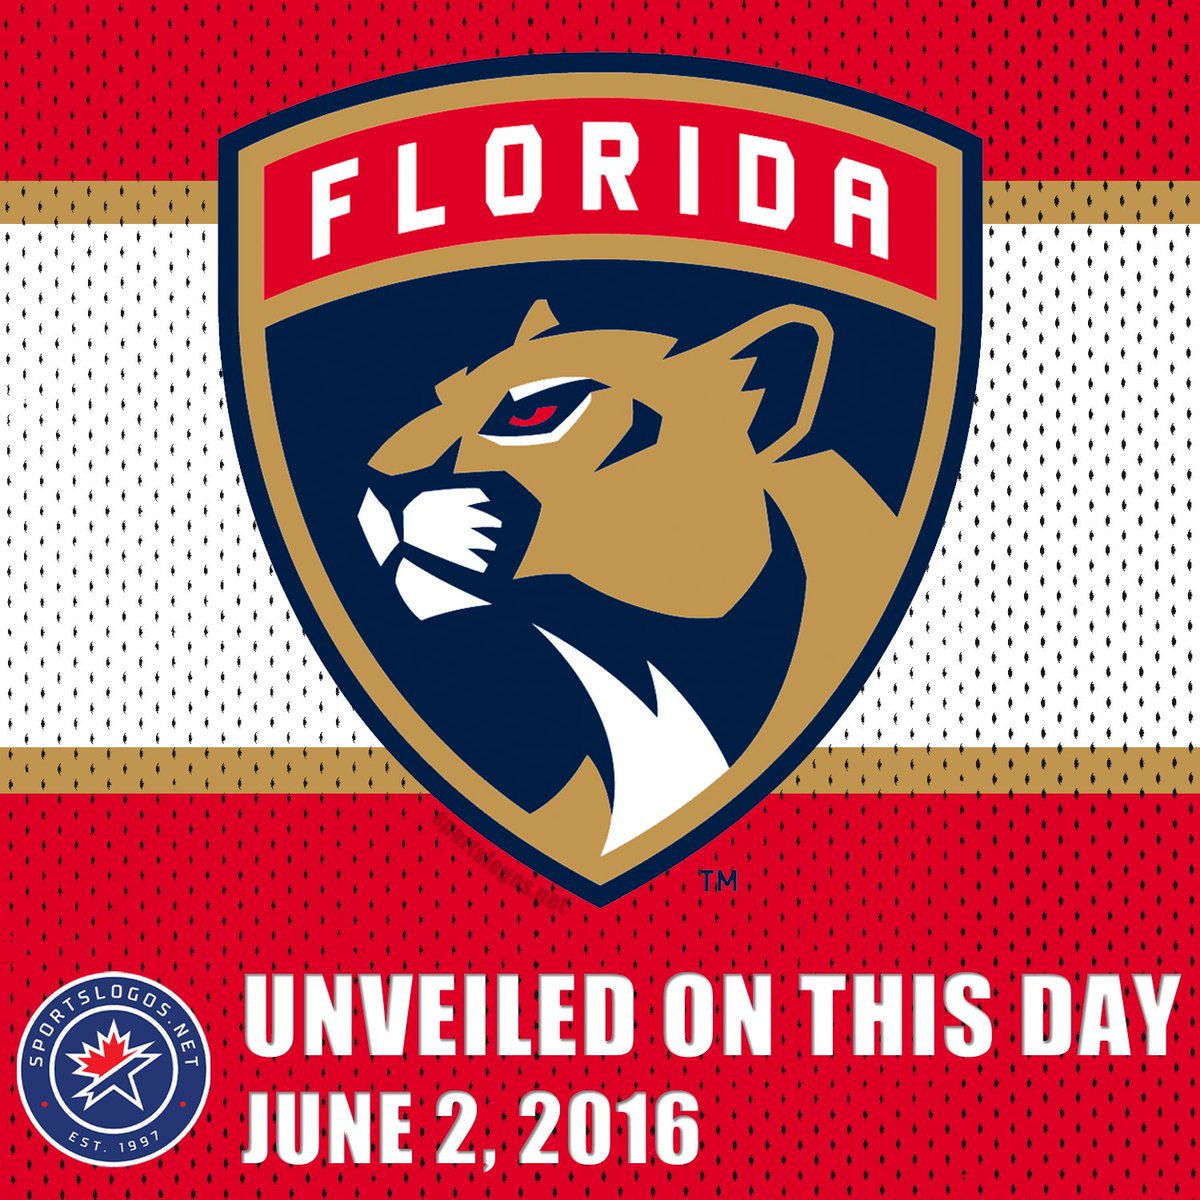 Happy Birthday to the Florida Panthers shield logo, unveiled six years ago tonight at a season ticket holder event. https://t.co/7E0rJkLsq7